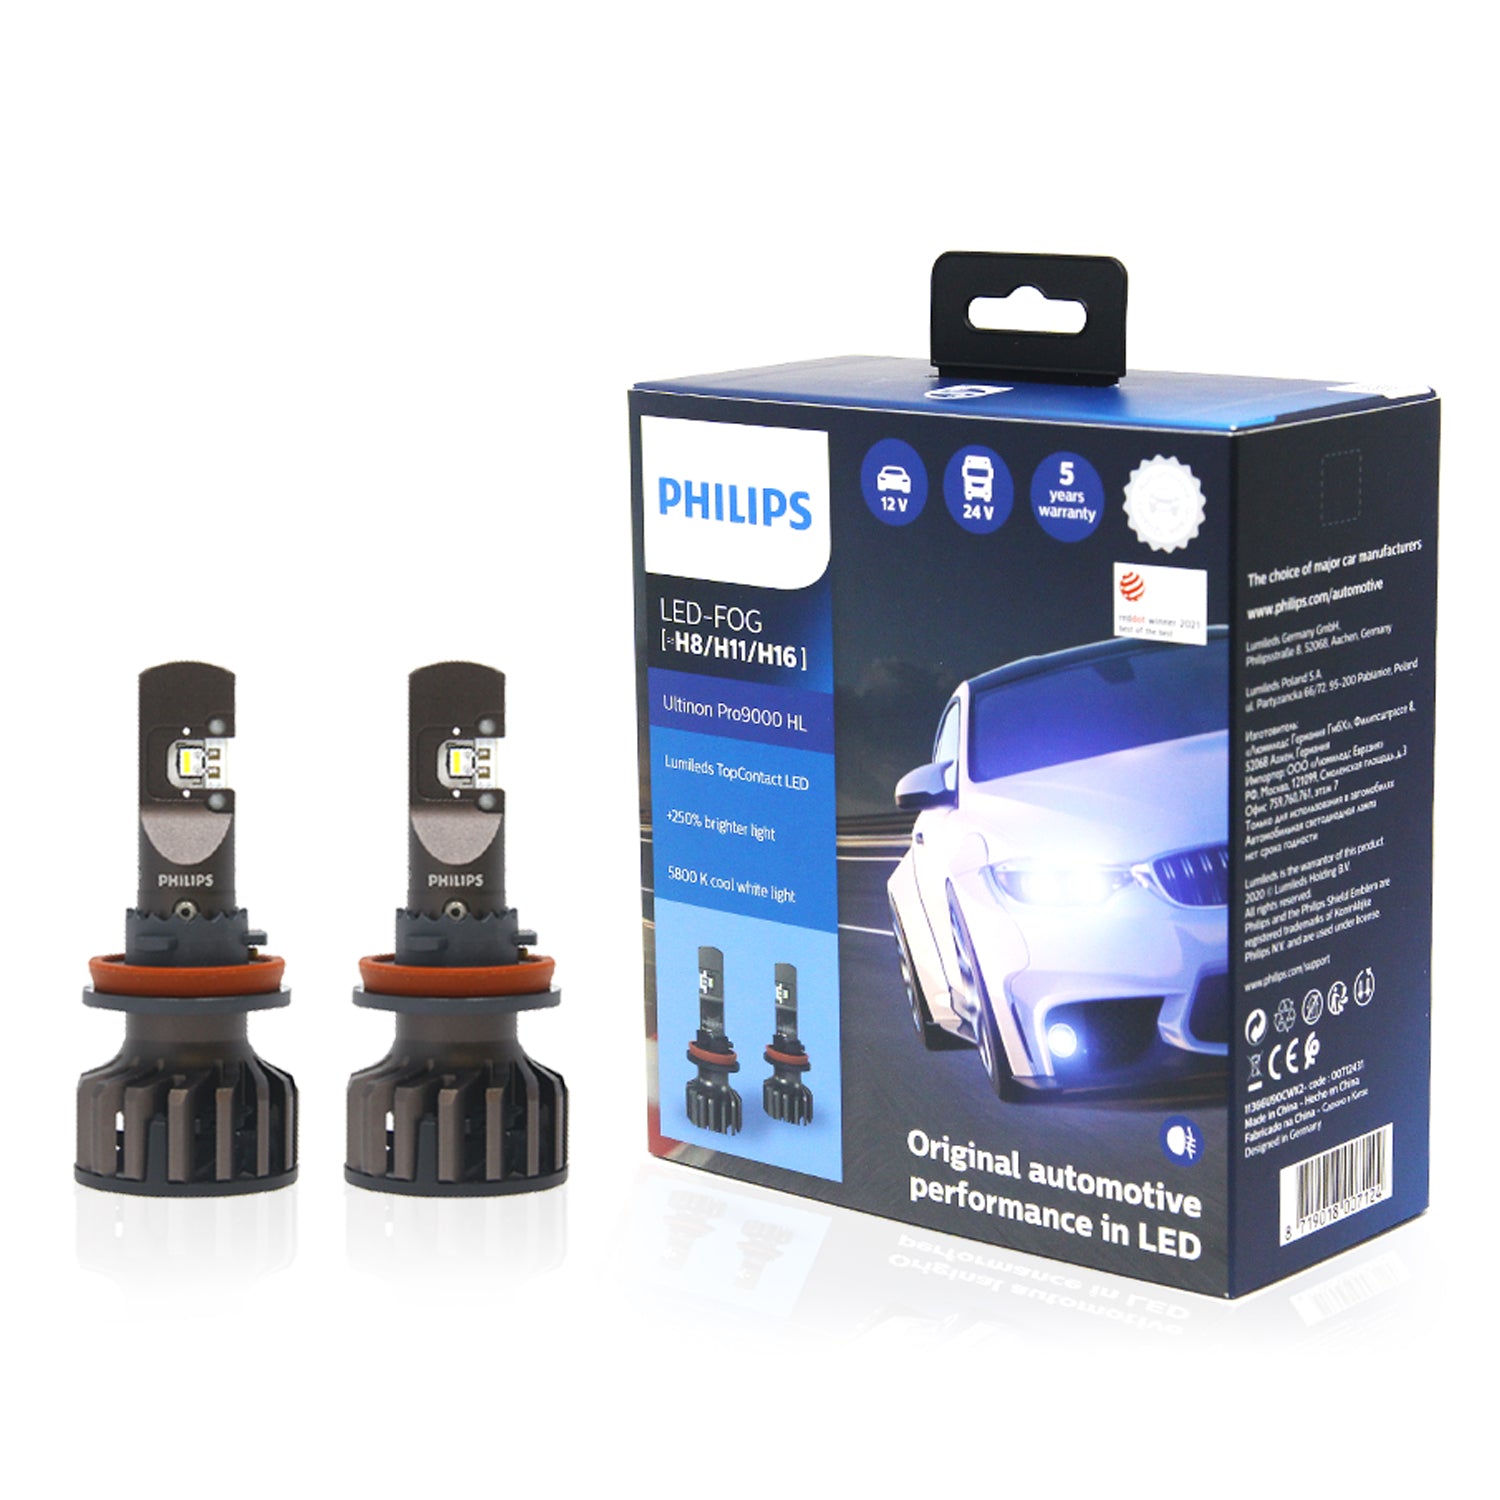 Phillips Ultinon Pro9000 H8, & H11 LED – HID CONCEPT